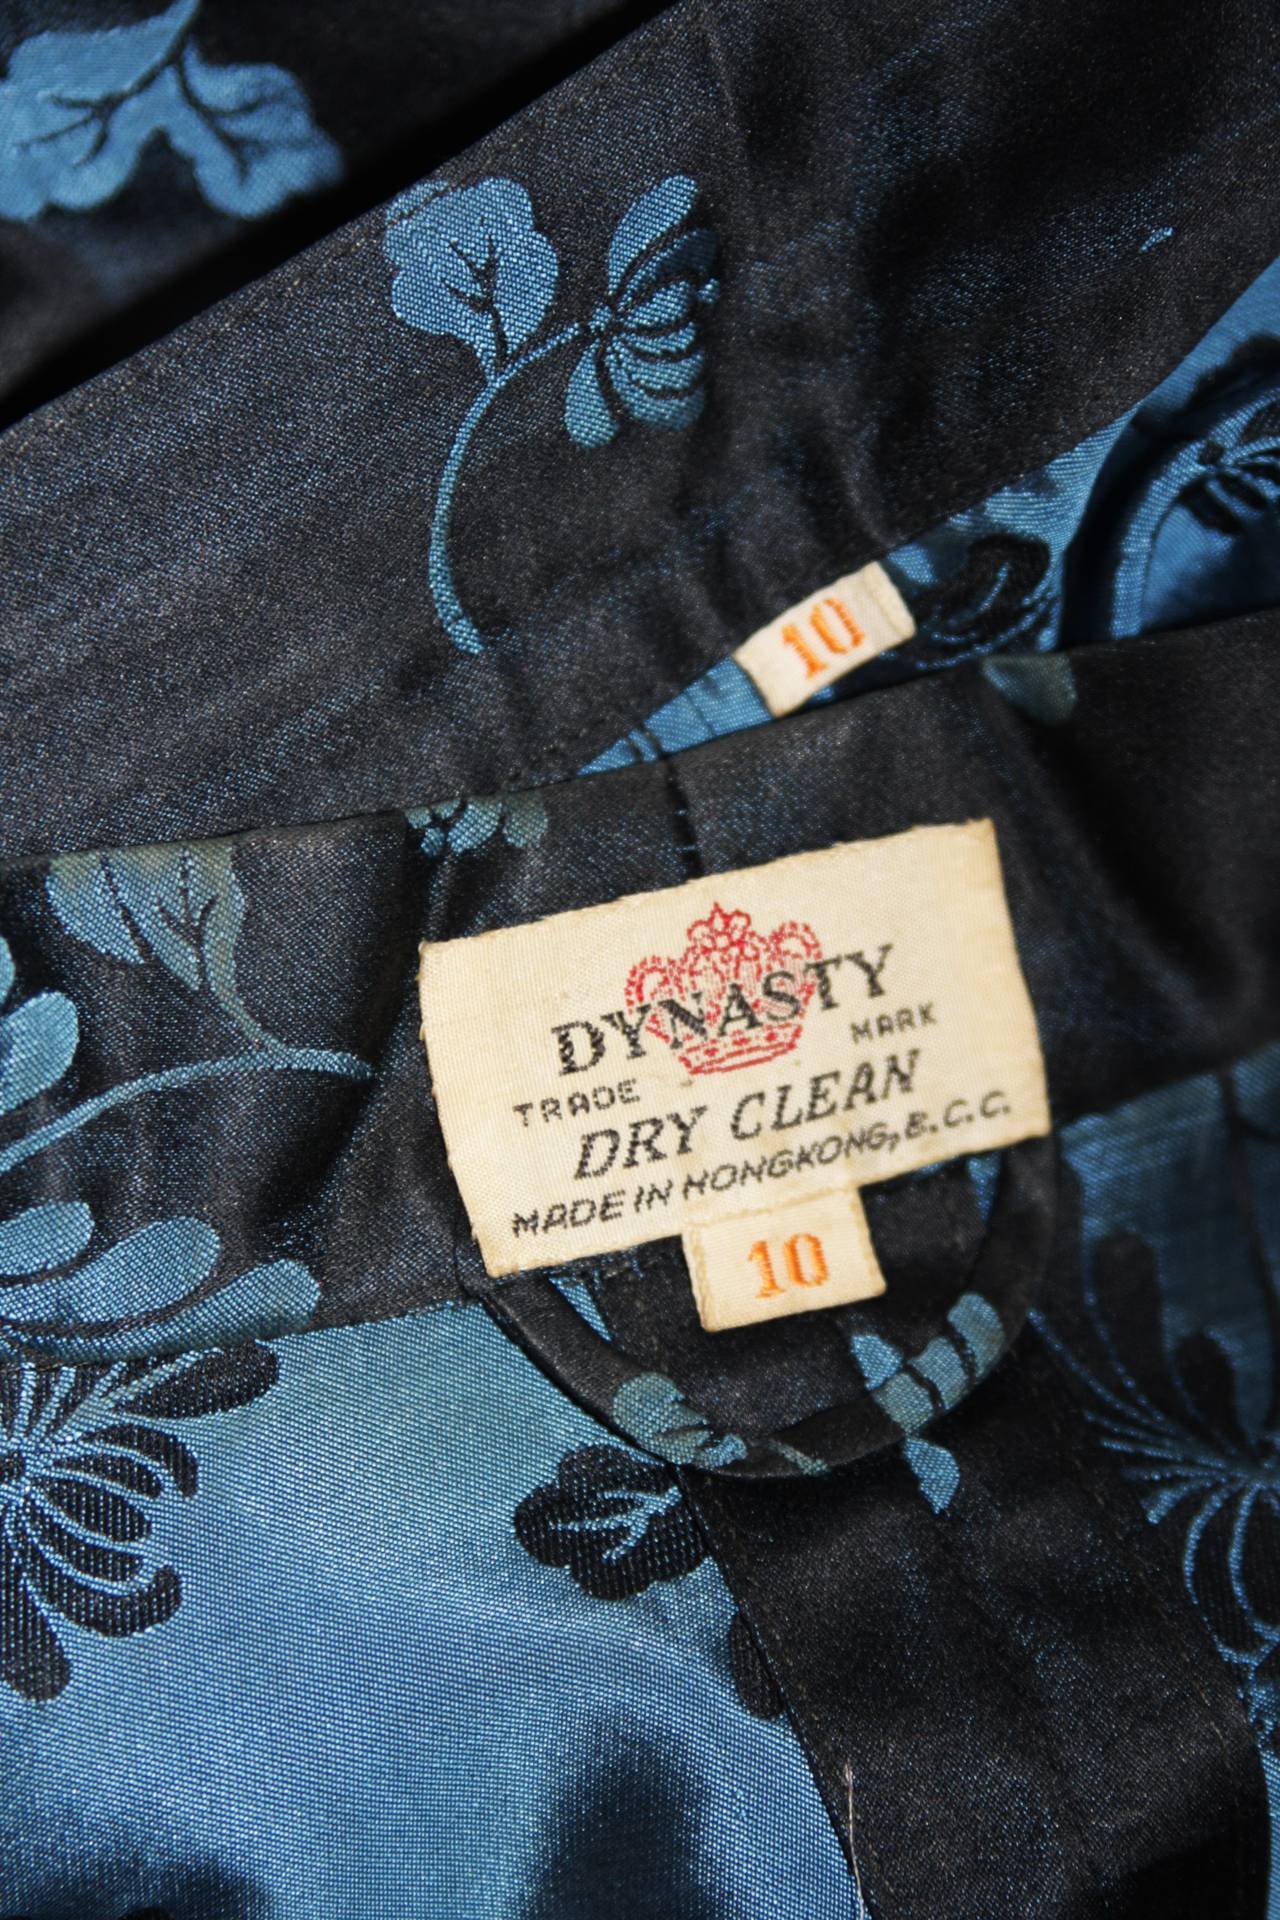 Atomic Era Dynasty Asian Inspired Black and Blue Floral Pant Suit Sz 0 ...